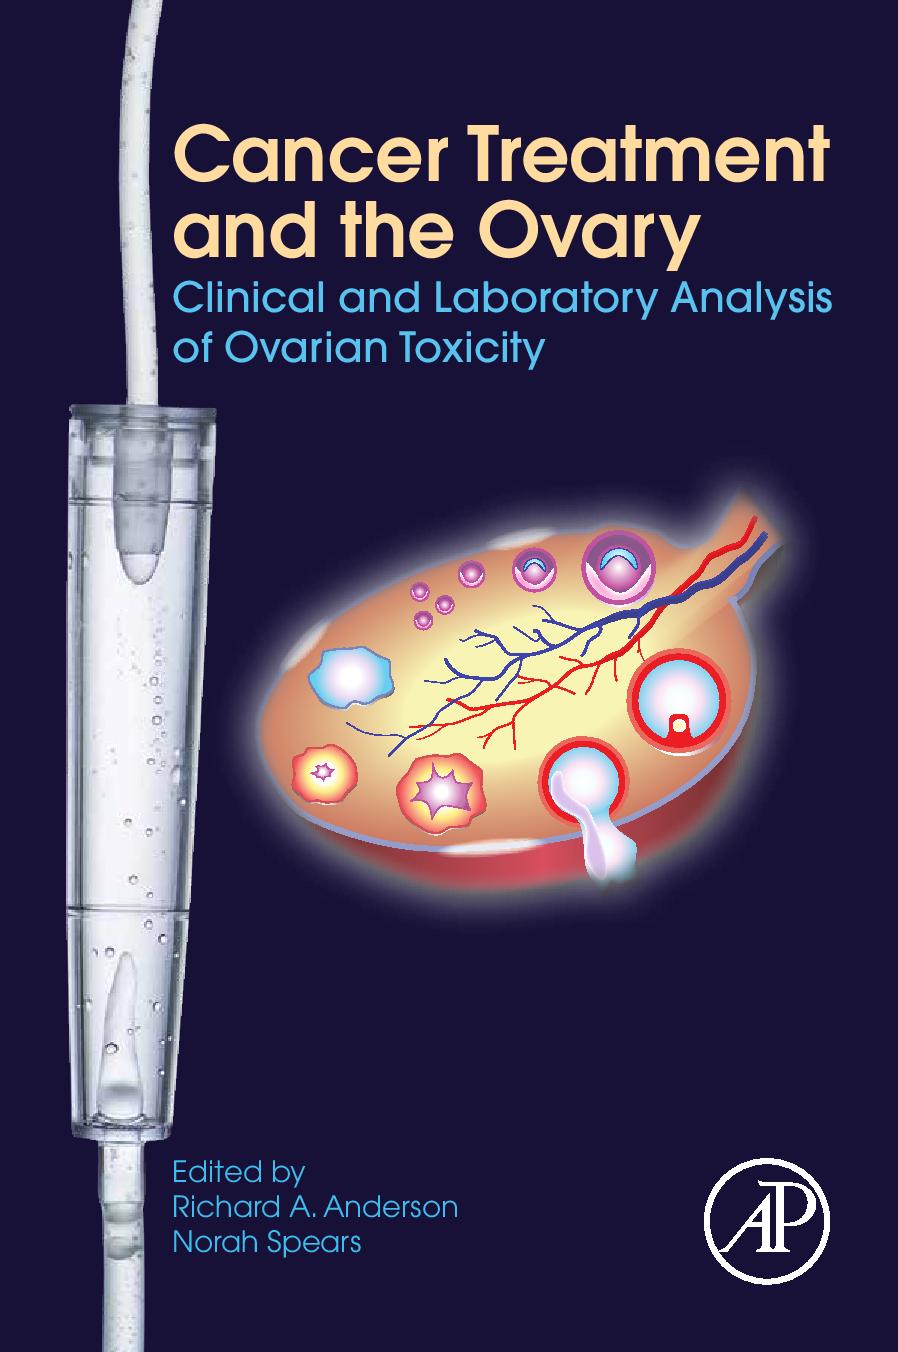 Image of cover of book 'Cancer treatment and the ovary'